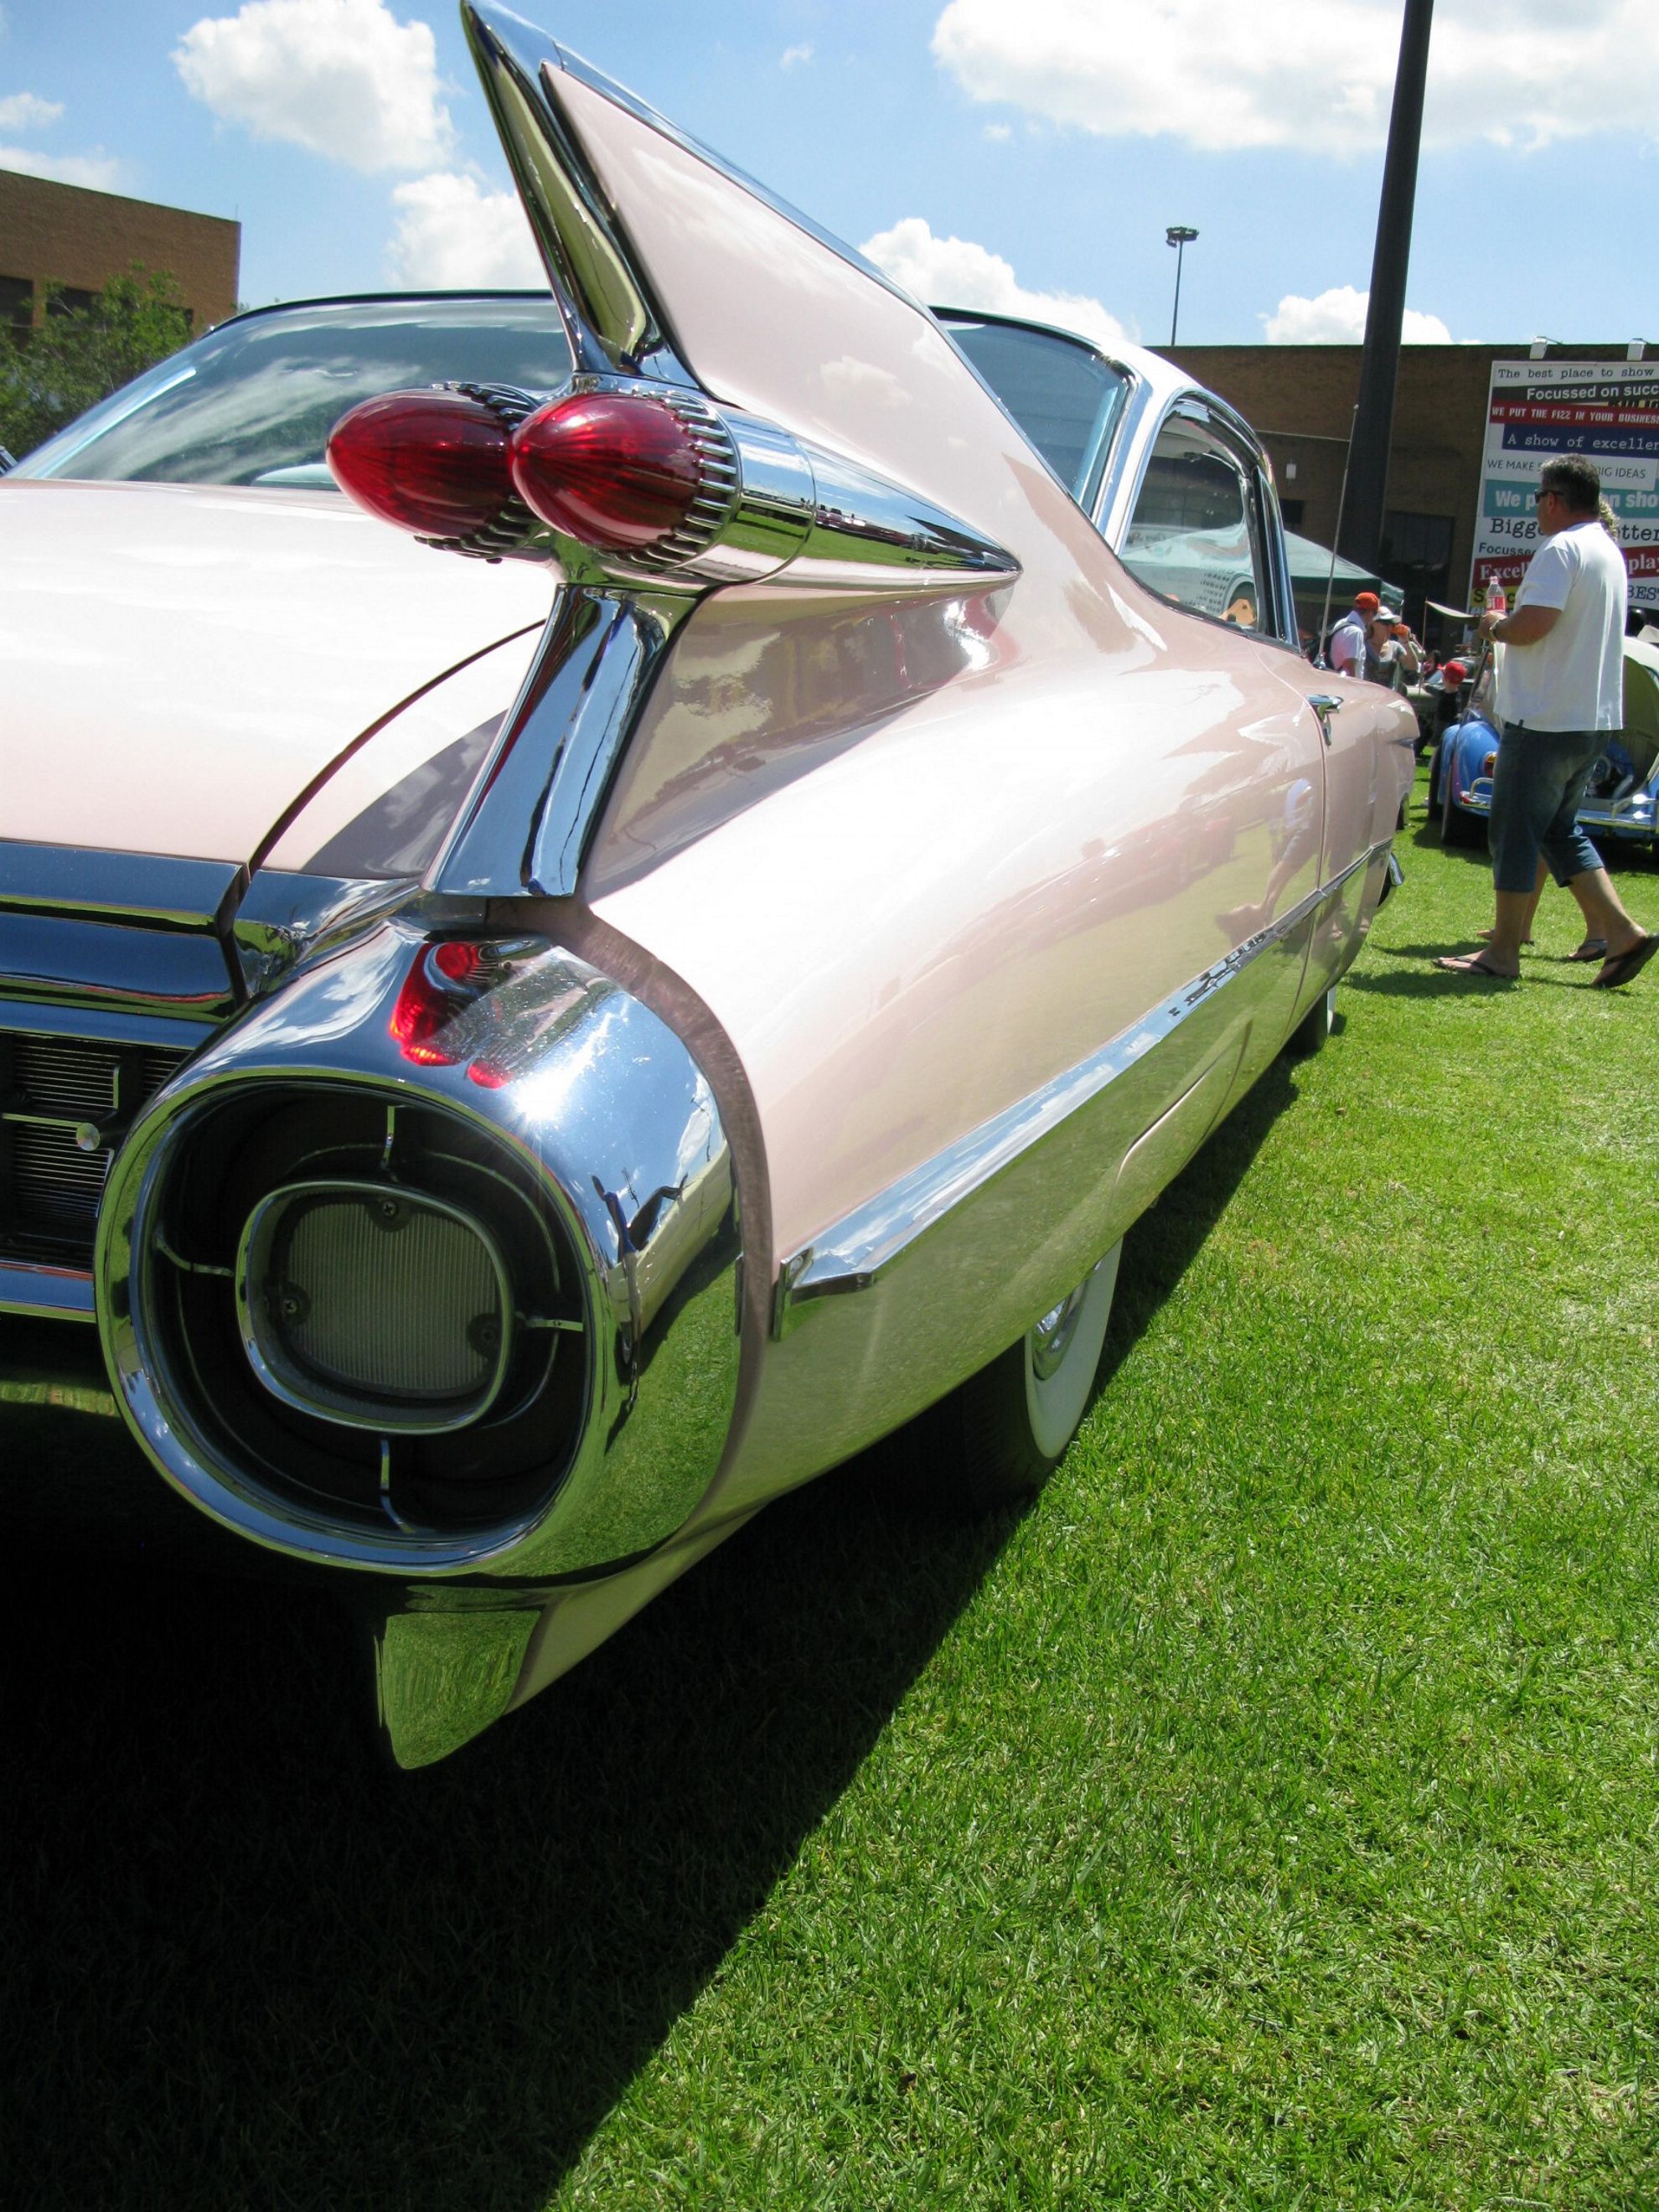 Johannesburg Classic Car Show July 7 at NASREC, South Africa